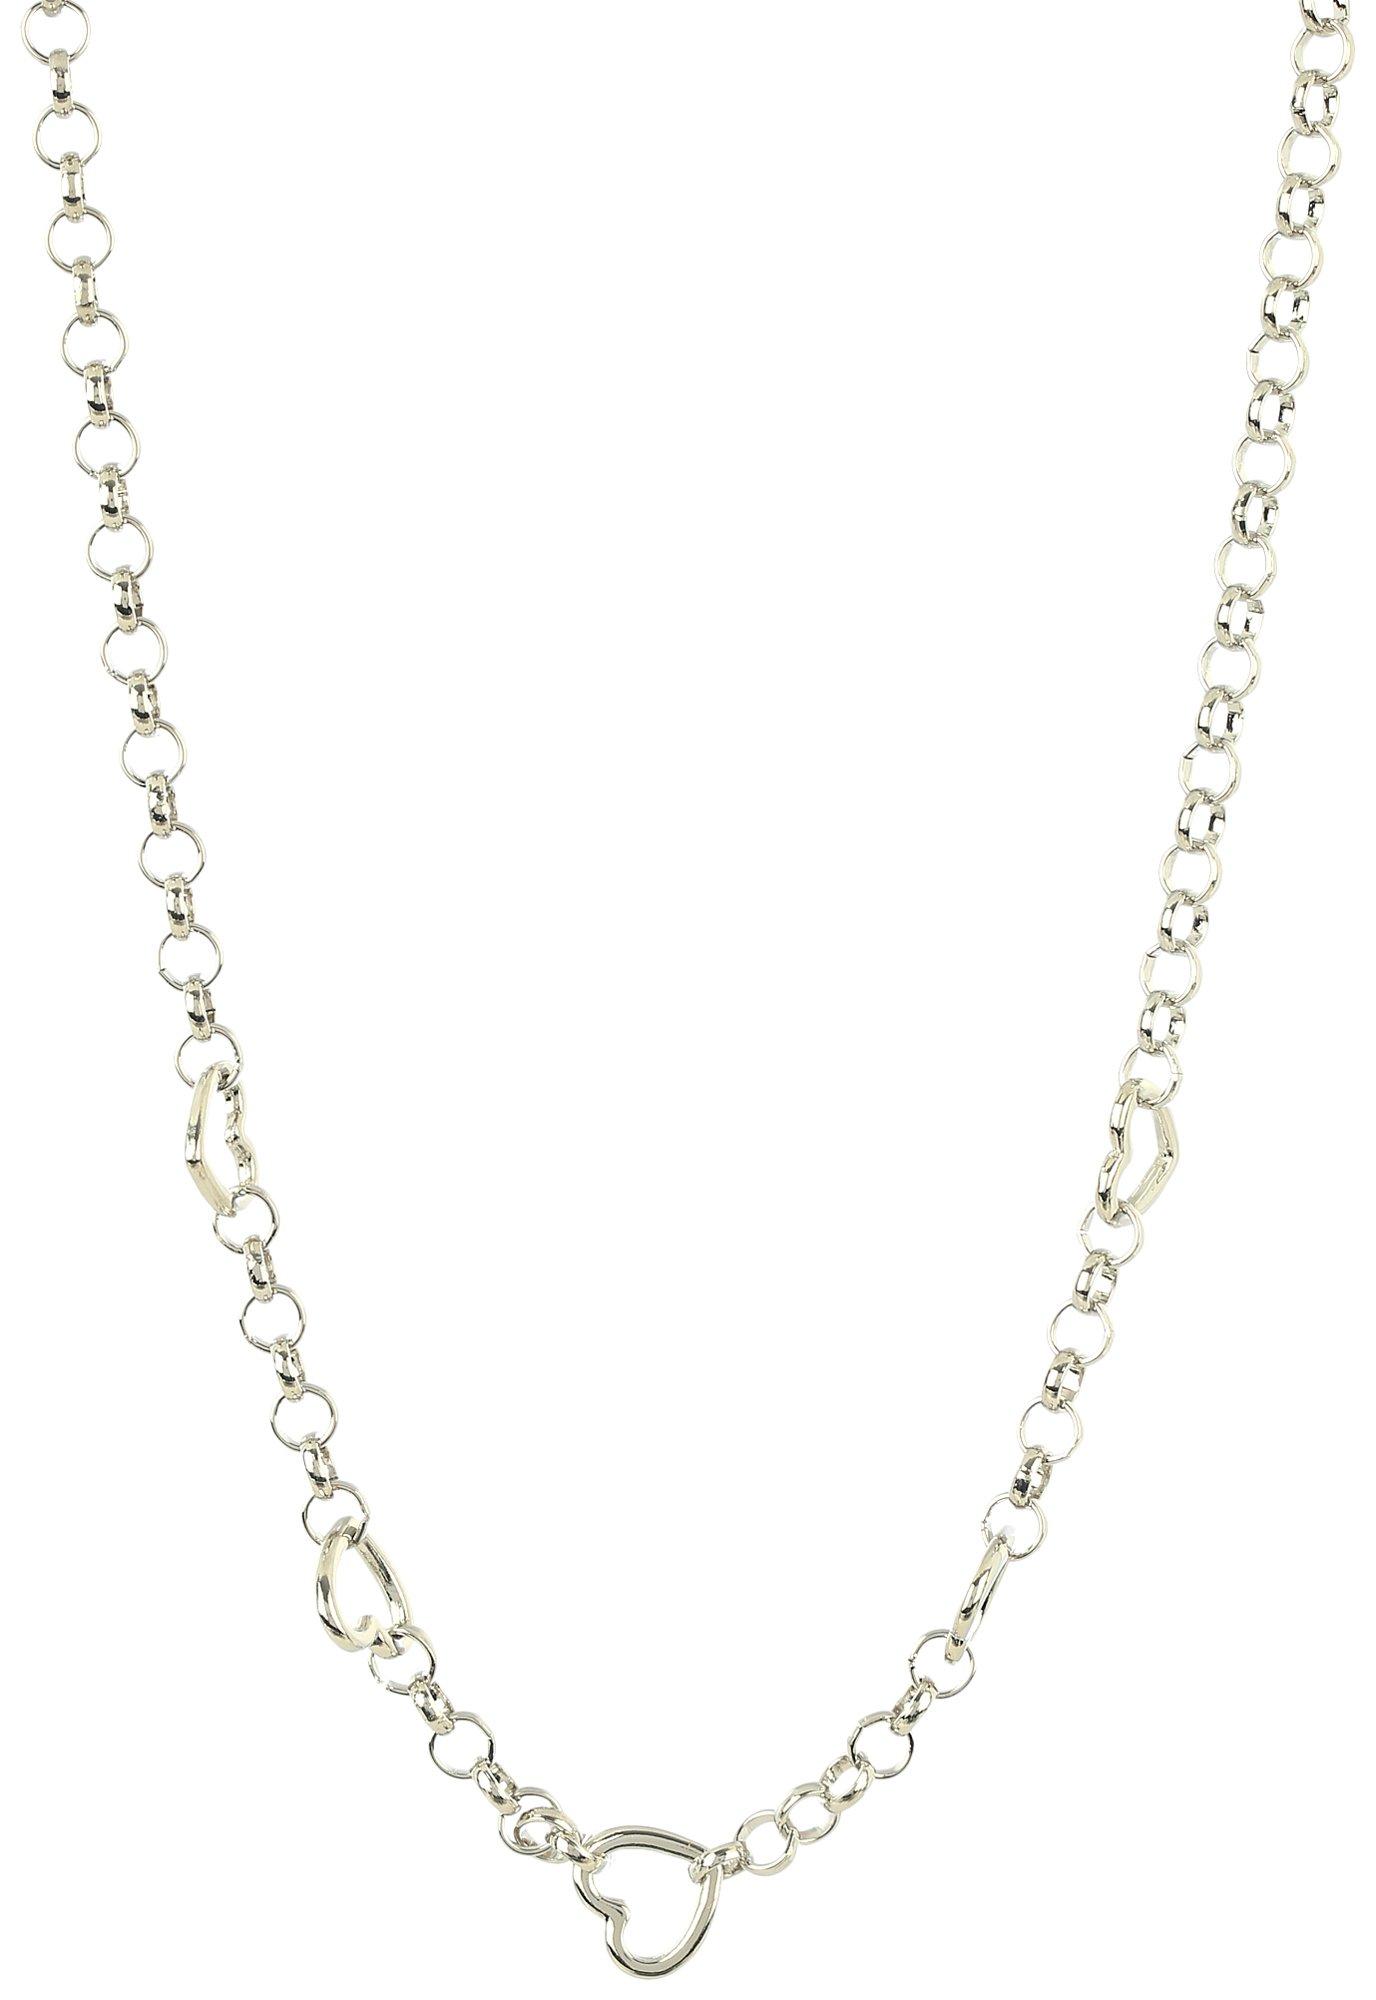 7.5 In. Heart Chain Necklace